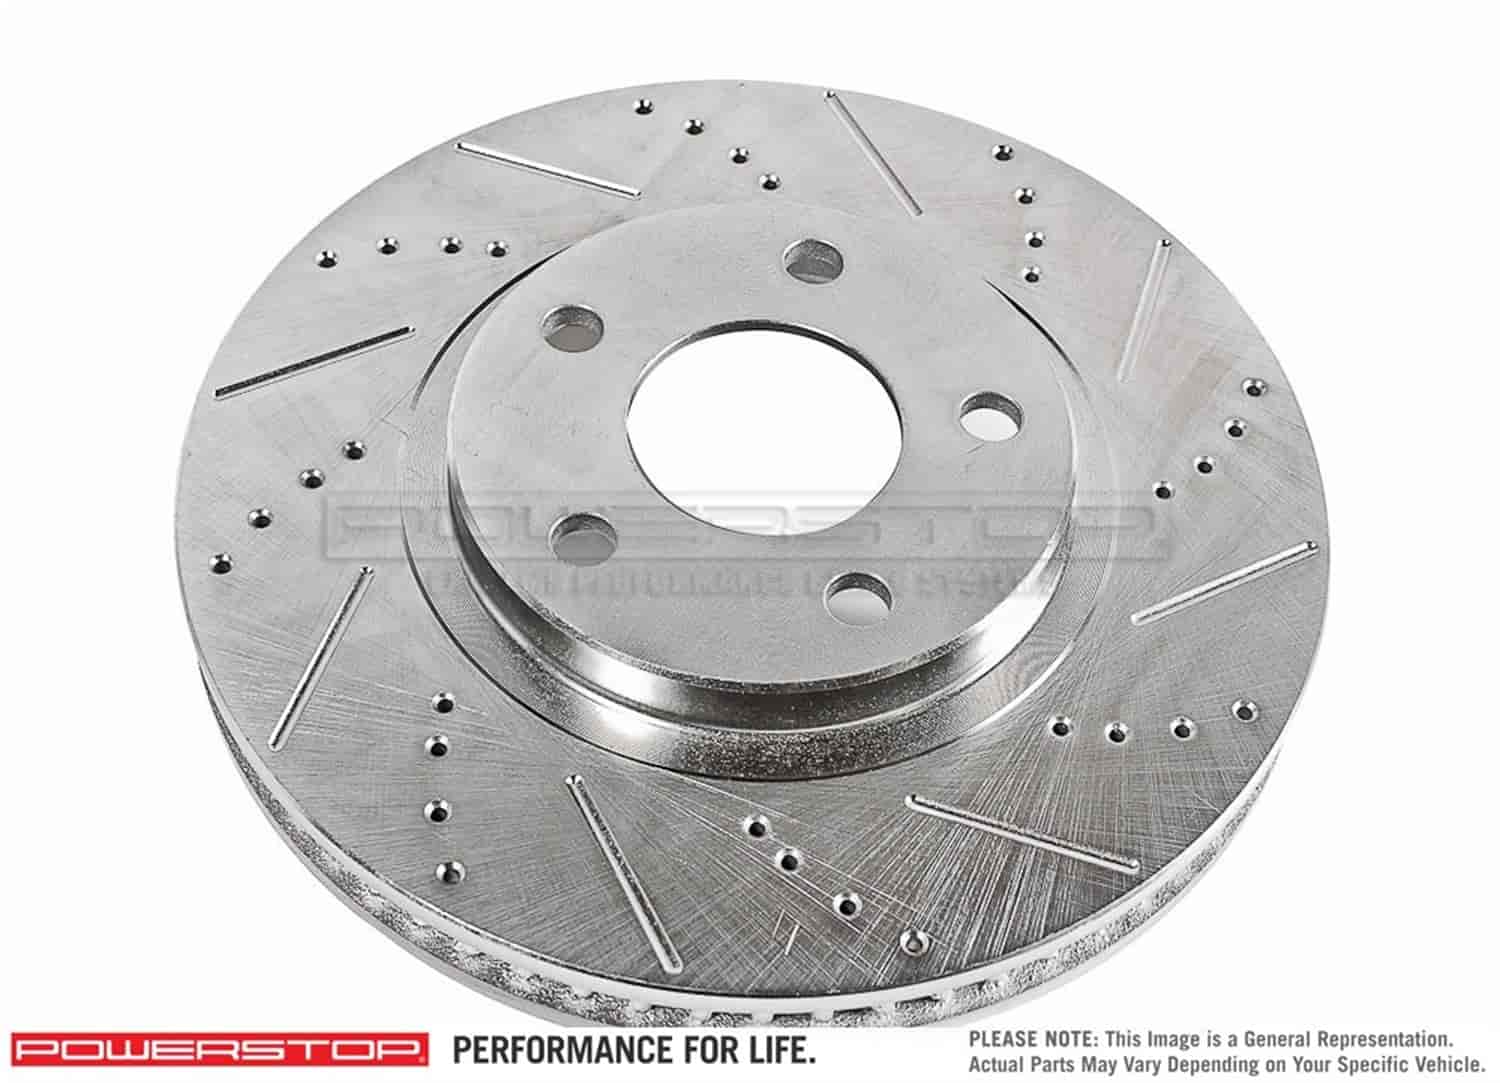 Extreme Performance Drilled And Slotted Brake Rotor Fits Select 1999-2002 Ford Truck/SUV Models [Front Right/Passenger Side]